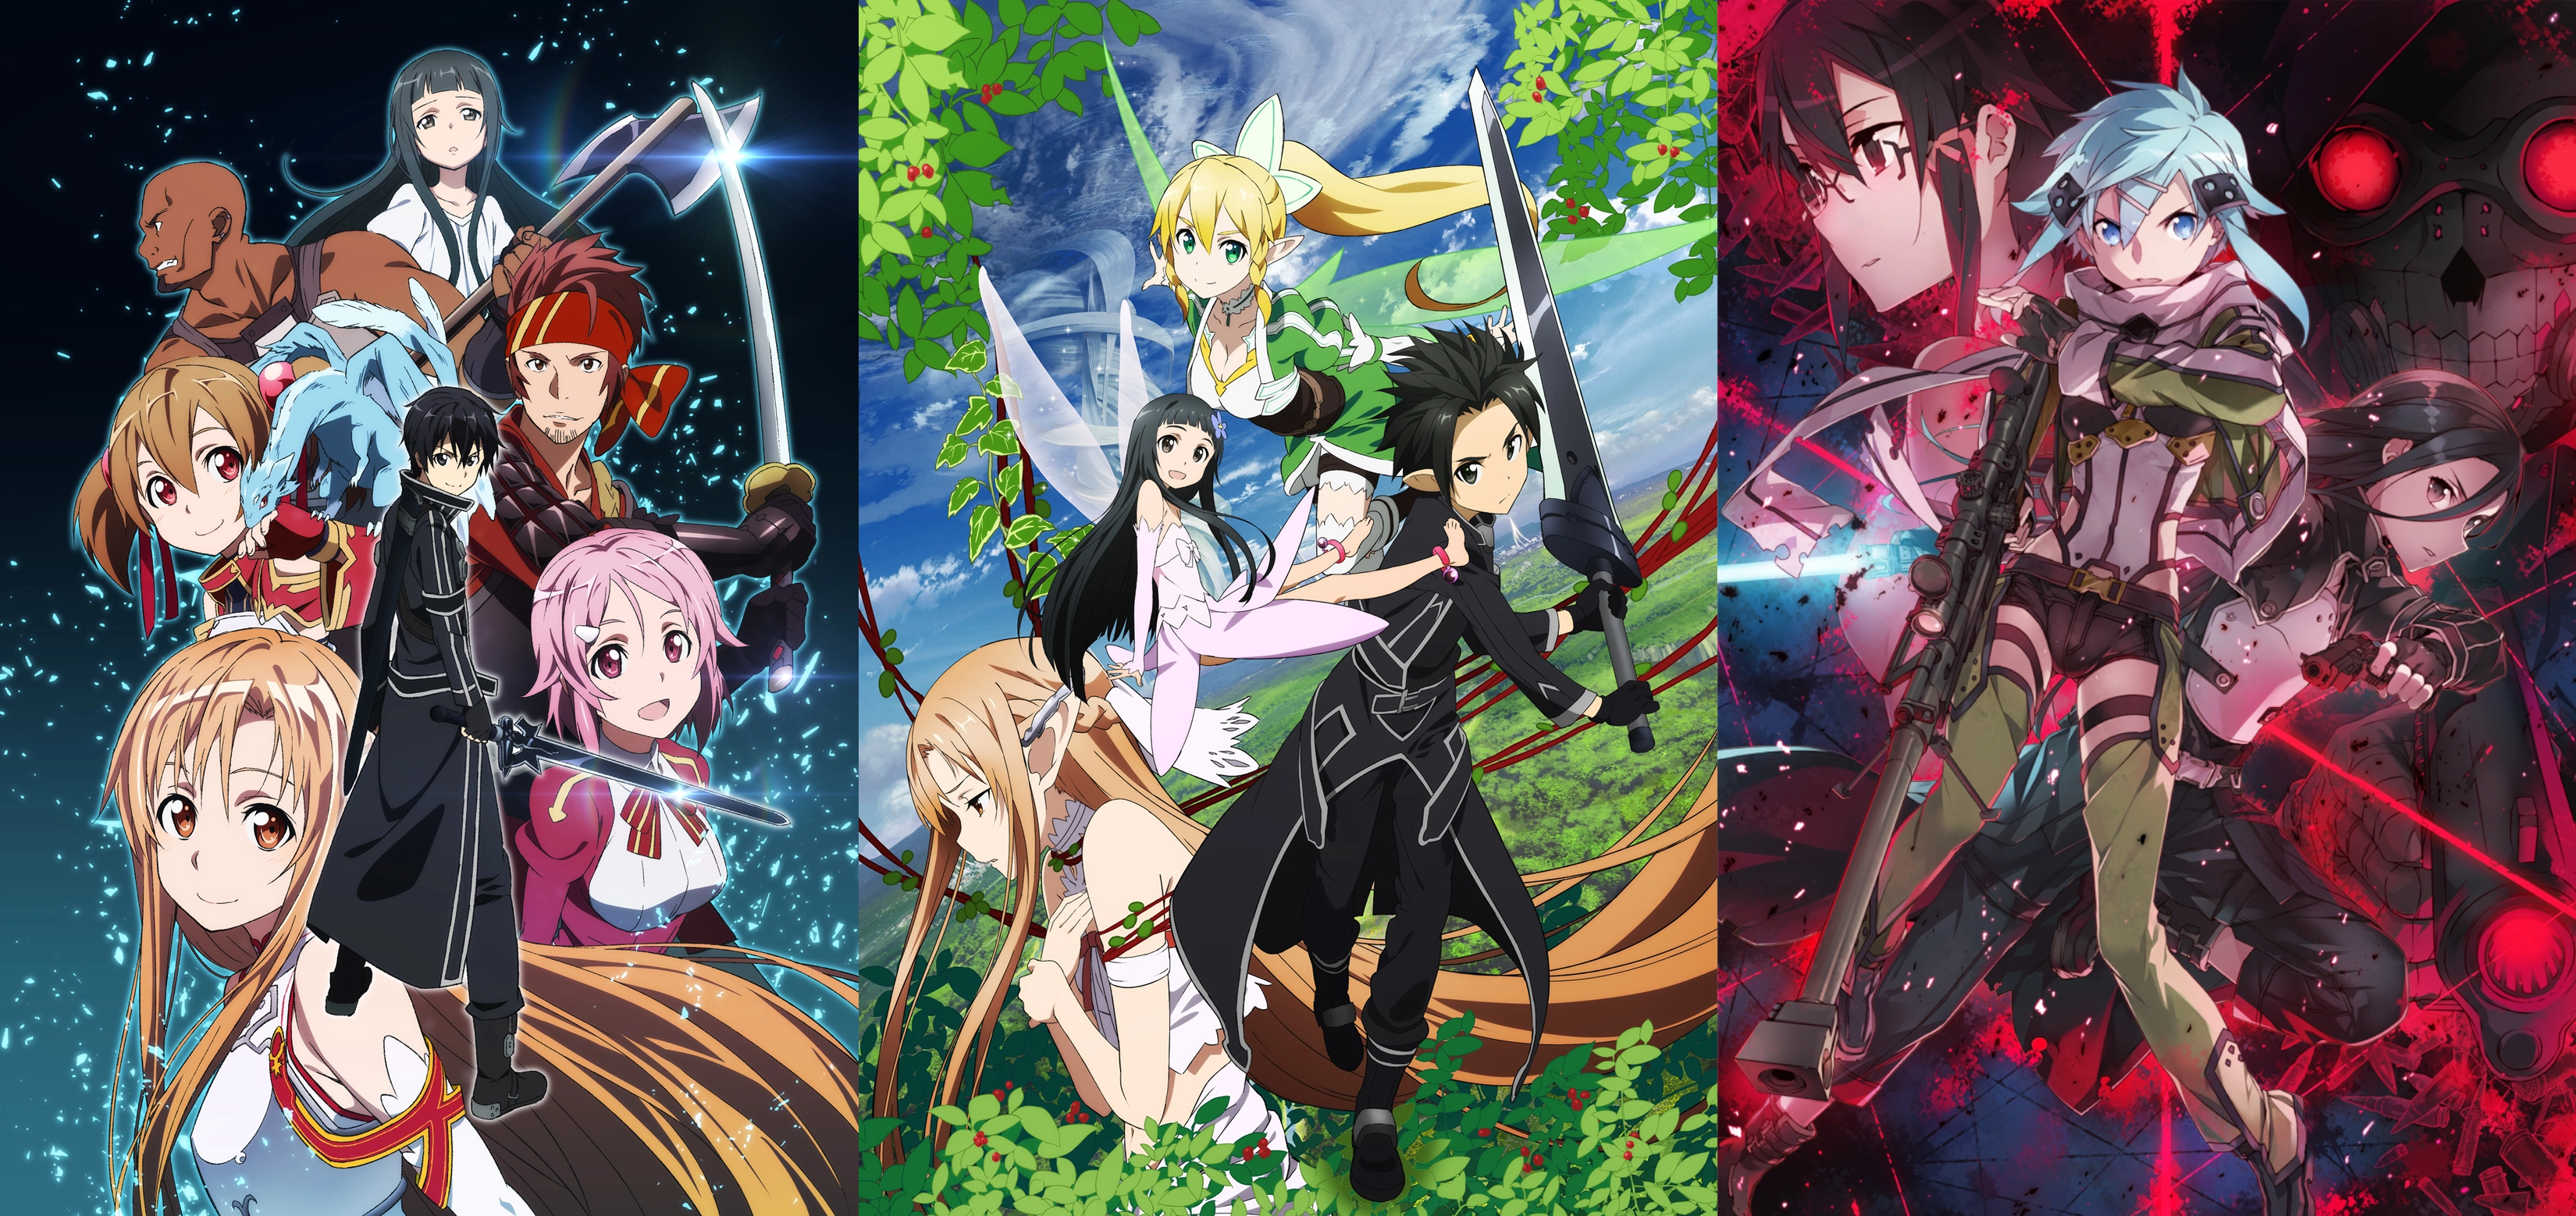 SAO posters are so good